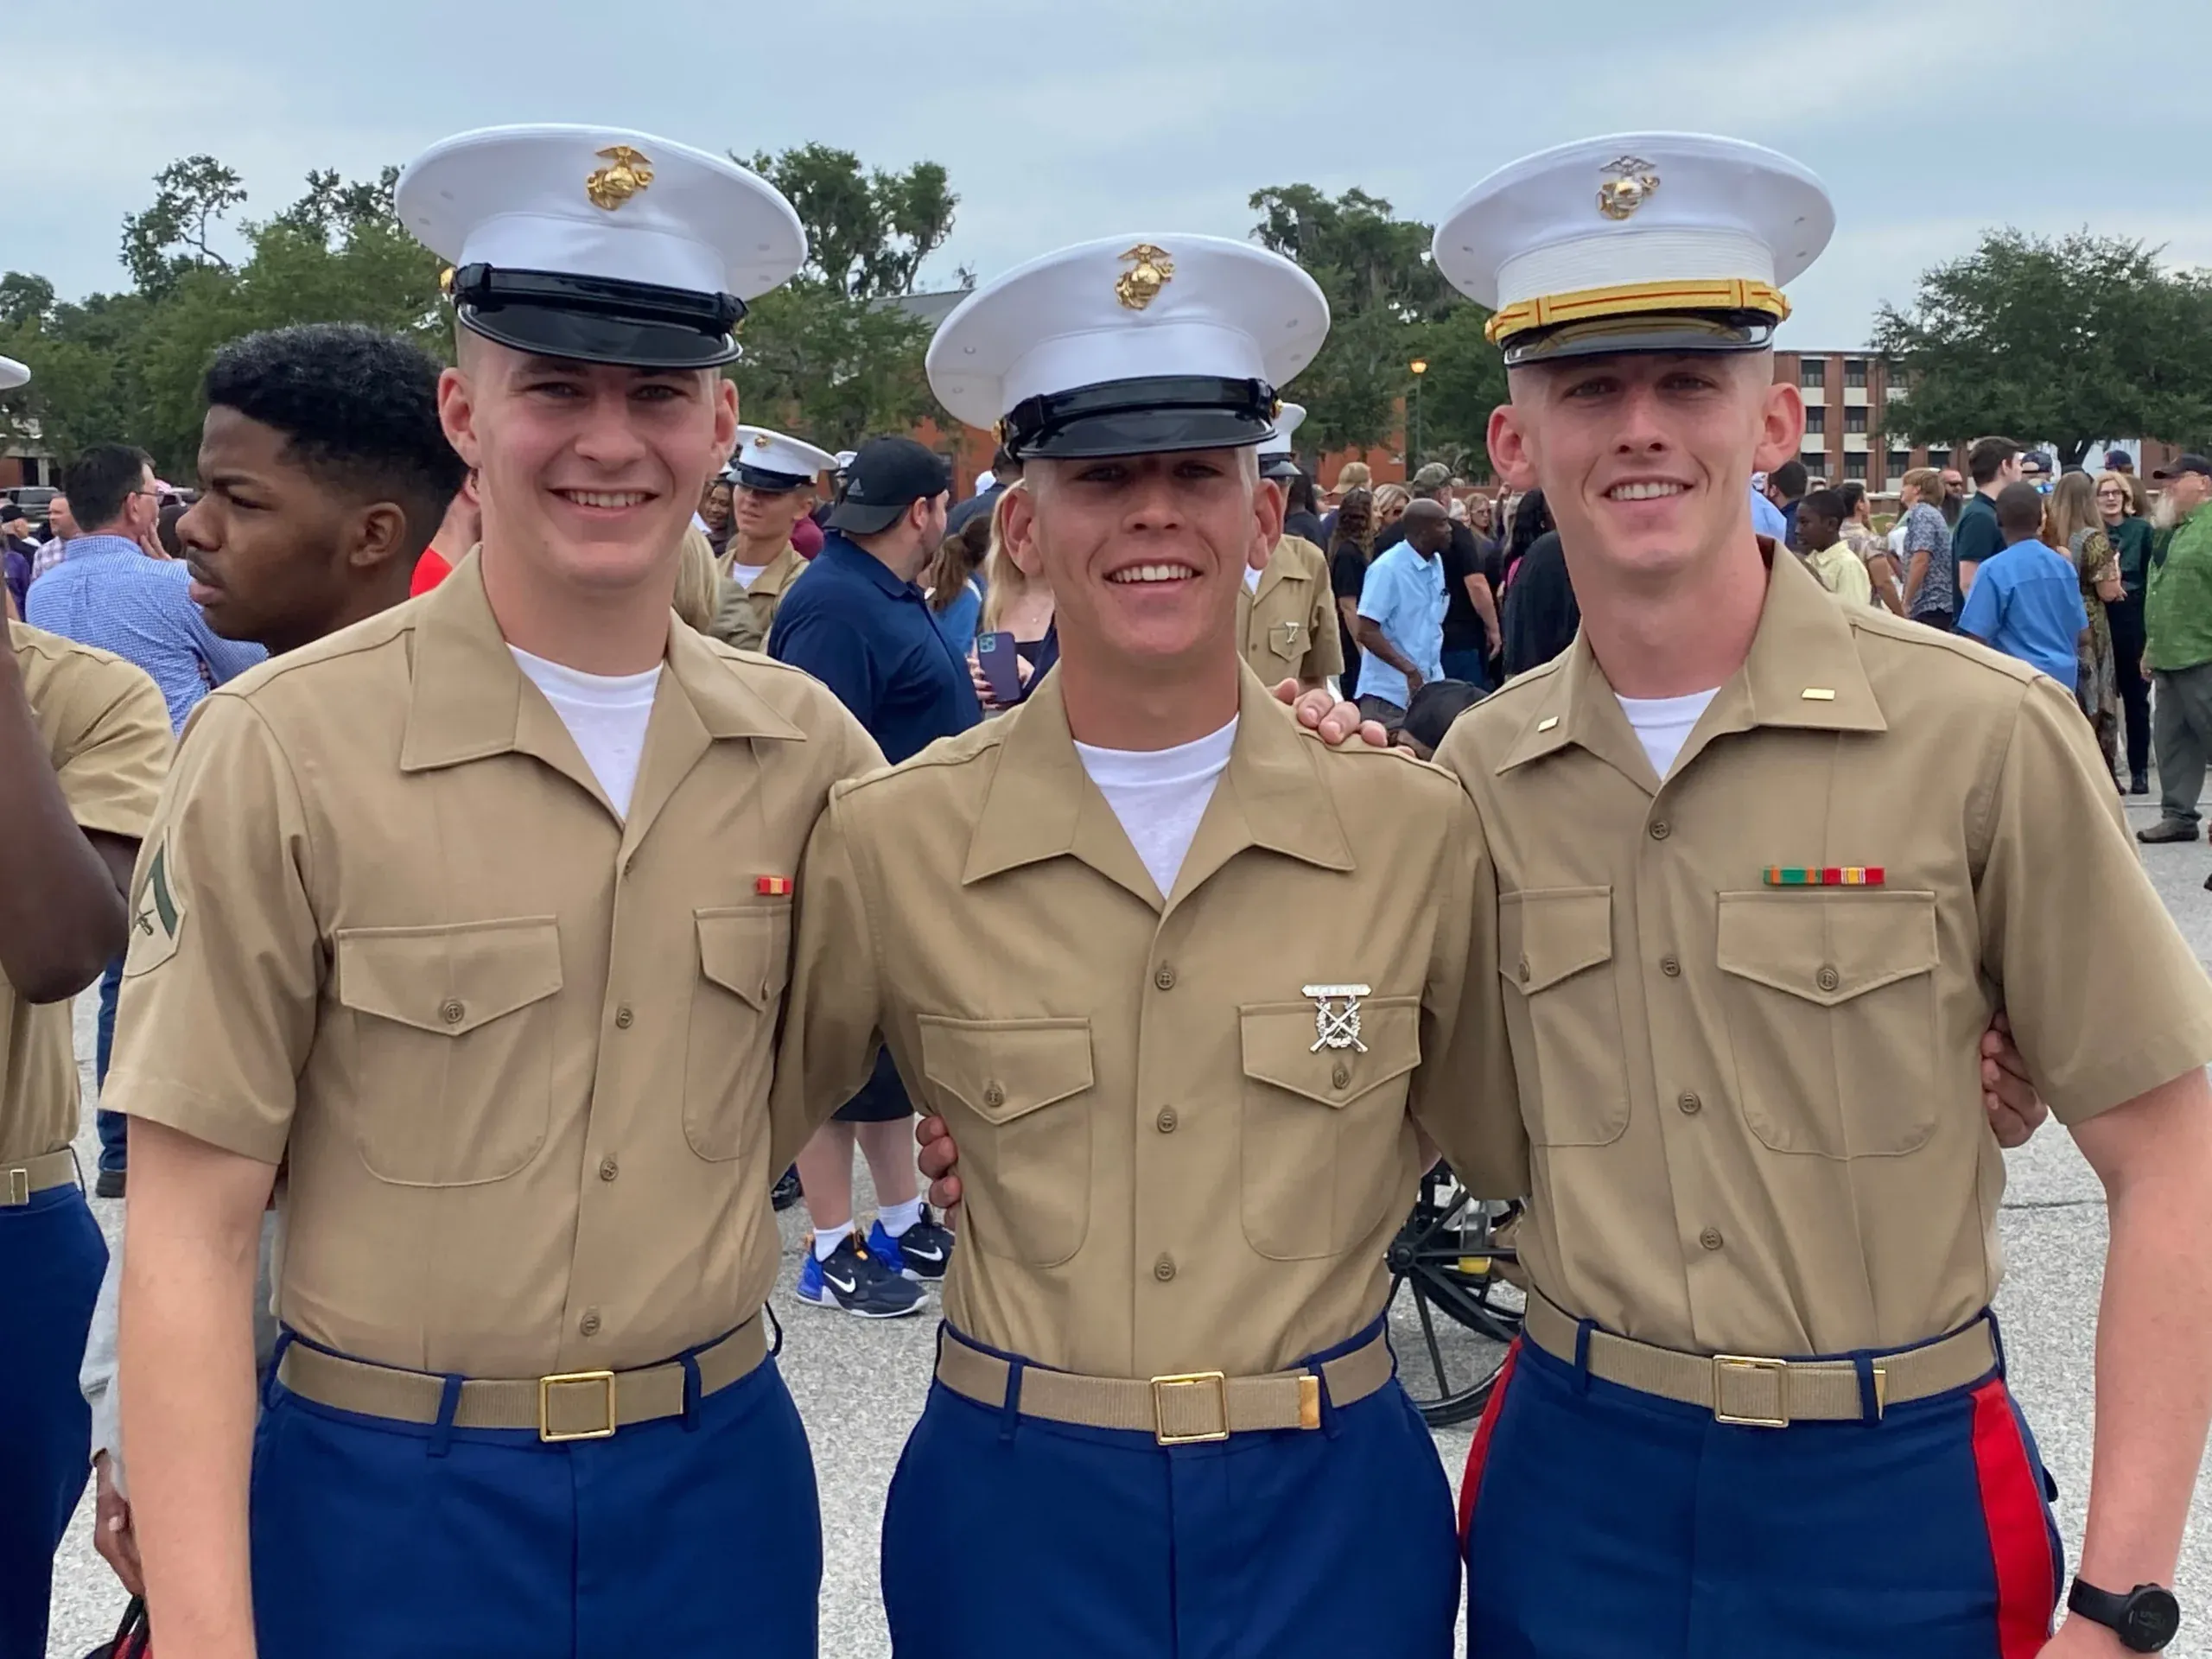 Brothers in arms: 3 Pearl River siblings, inspired by community, join Marines